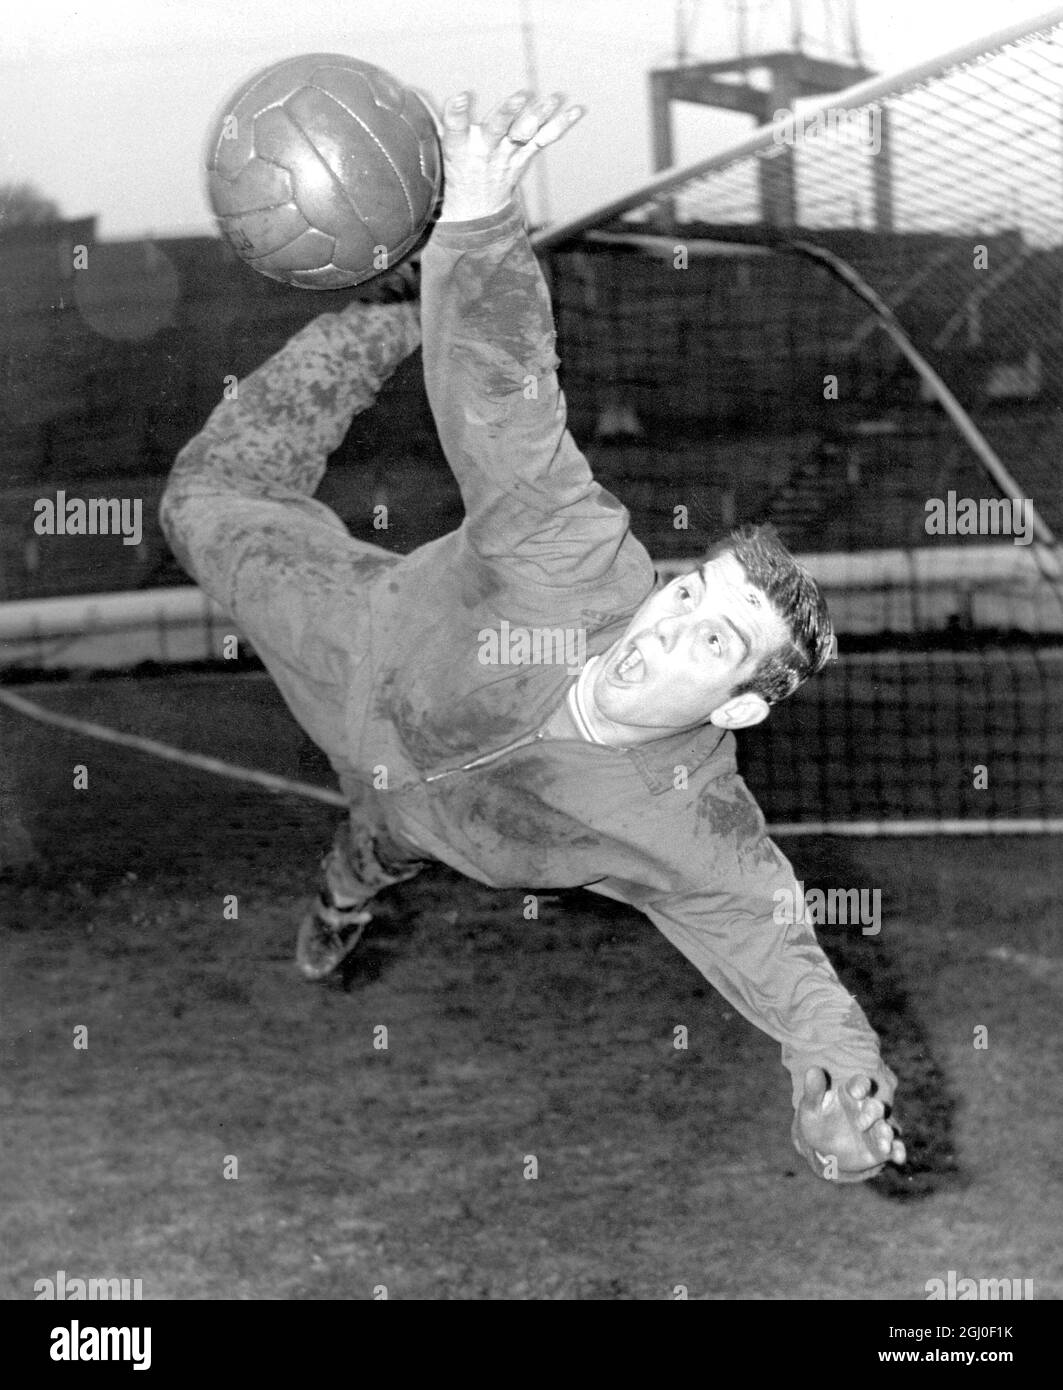 Nineteen year old Chelsea goalkeeper John Dunn, one of Chelsea's two young goalkeepers makes an acrobatic save during training at Stamford Bridge. Dunn is set to make his FA Cup debut against Tottenham Hotspur at White Hart Lane on Saturday because Peter Bonetti has a fractured finger. 31st December 1963. Stock Photo